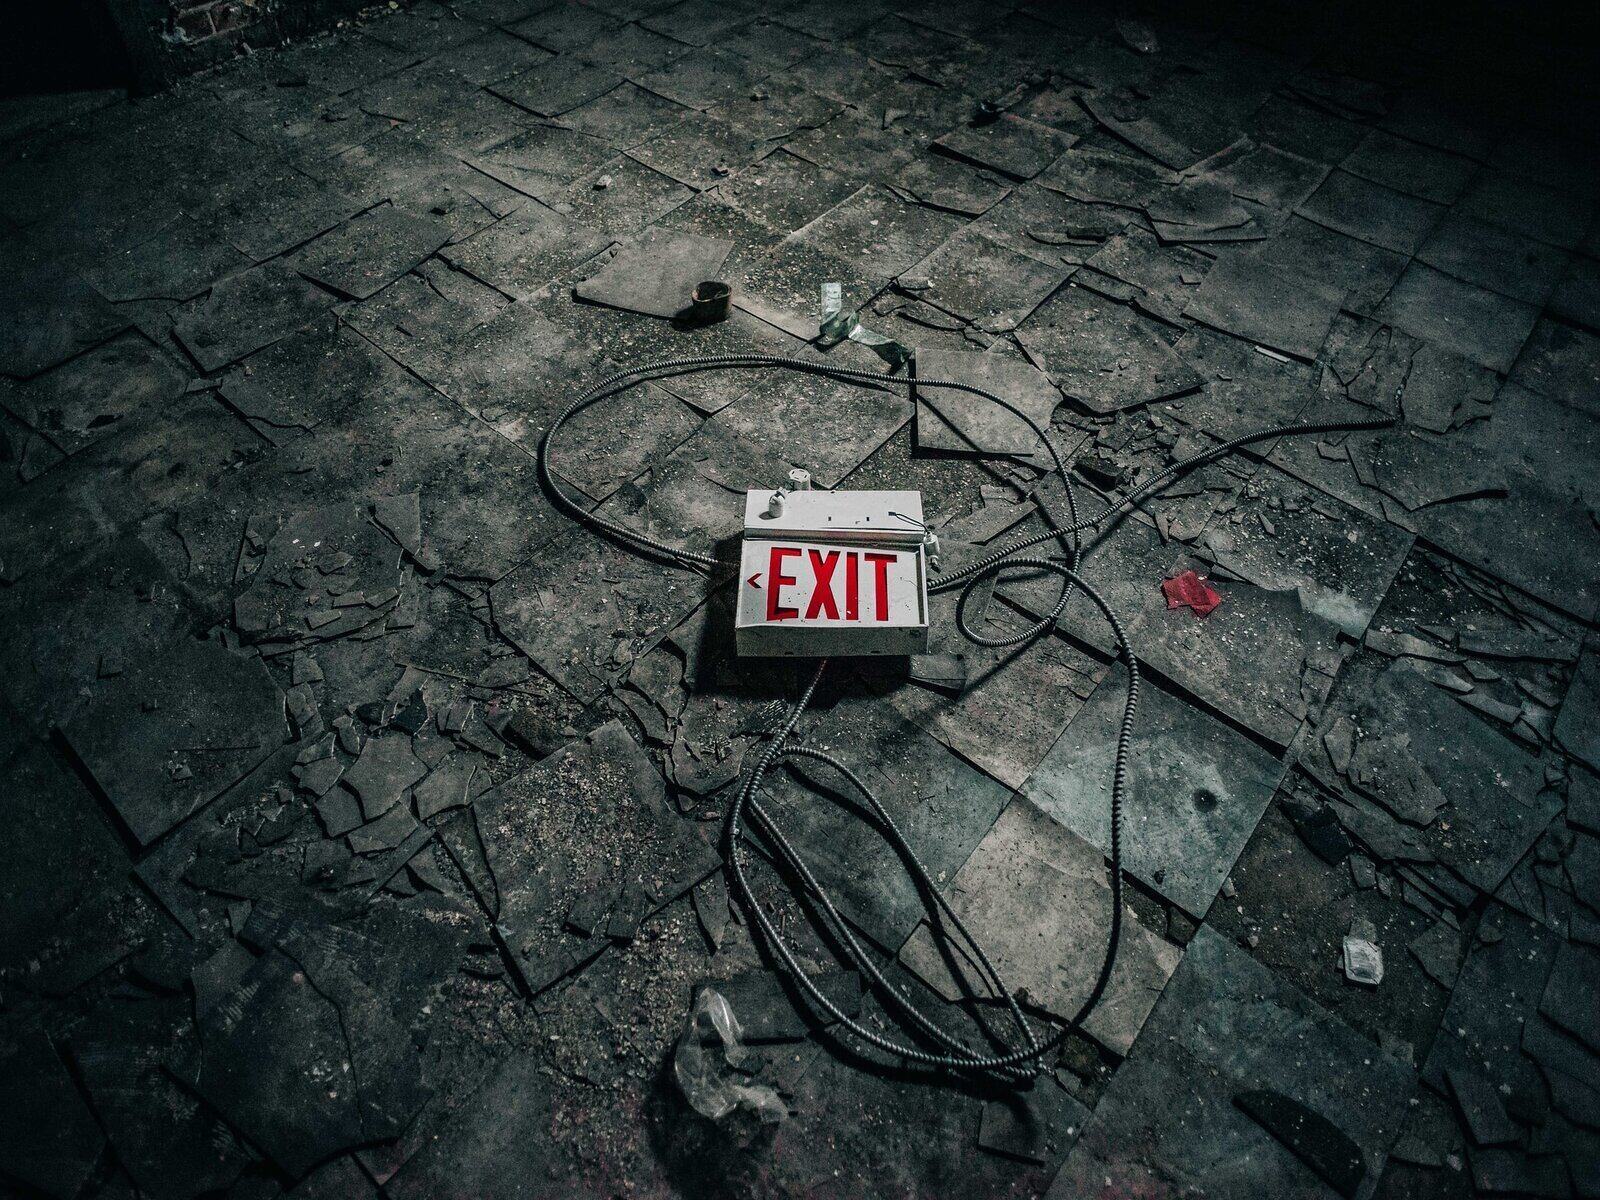 Exit sign for virtual escape room